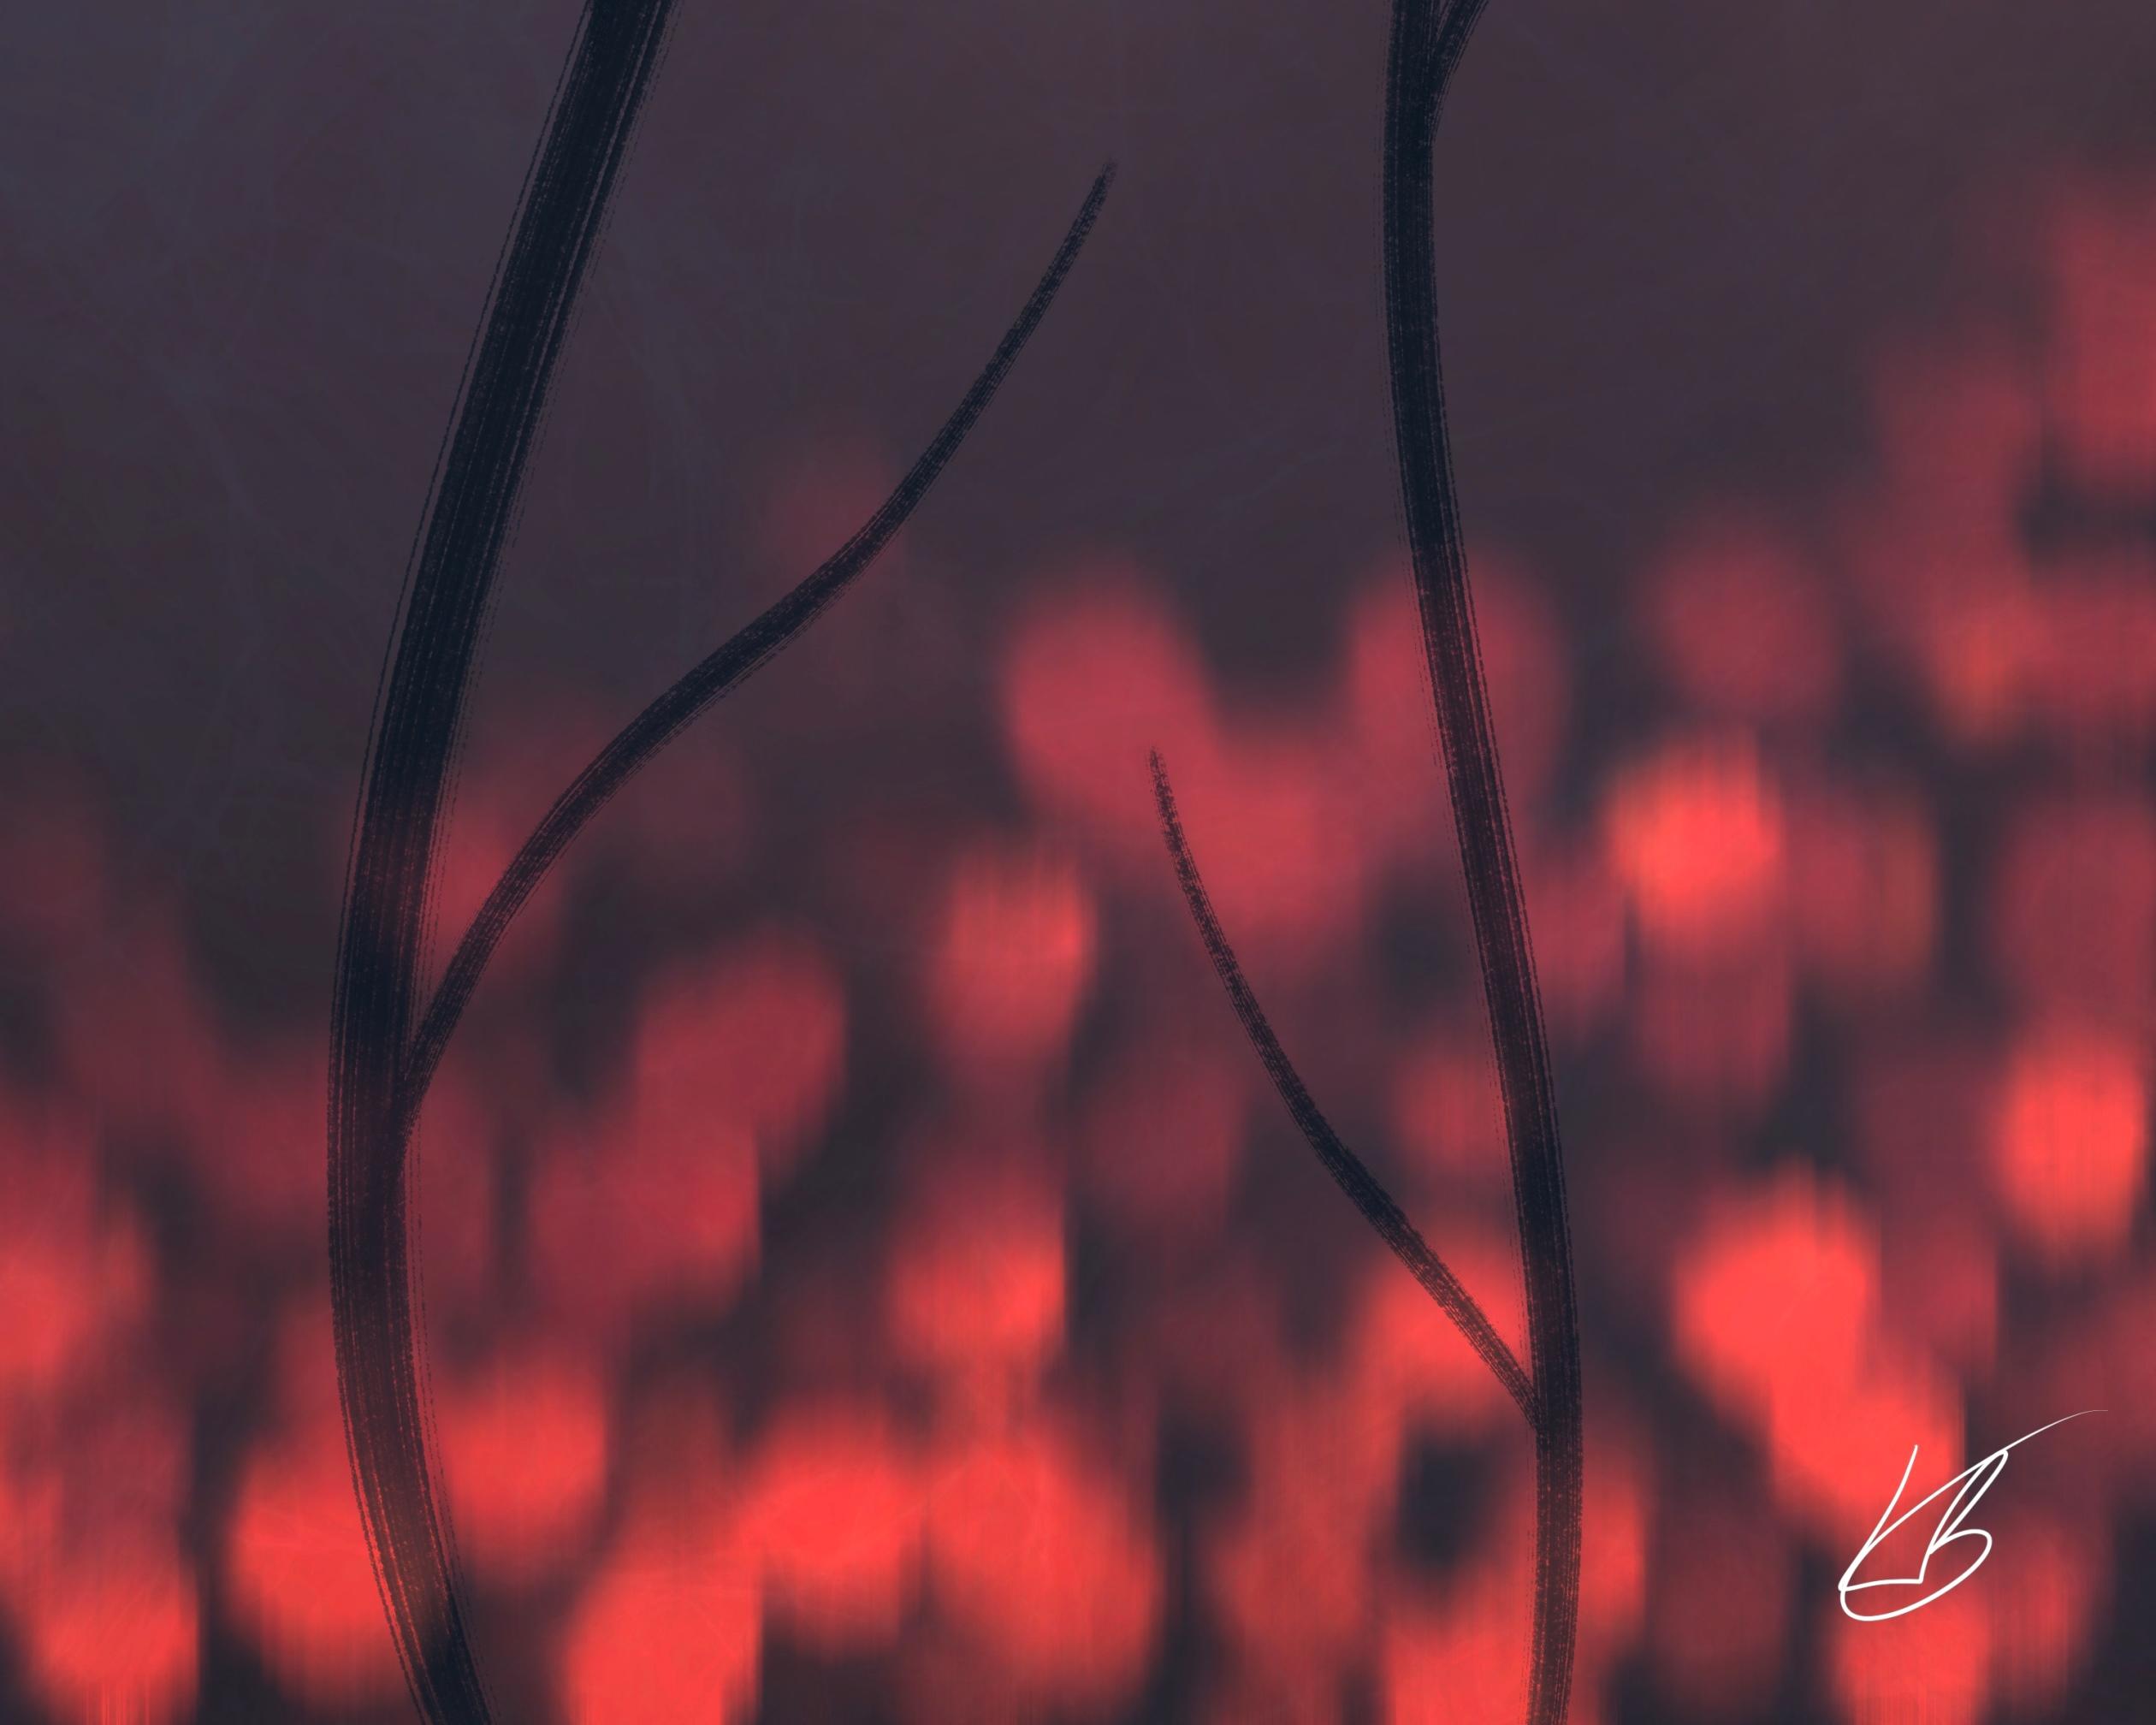 Close up of the digital signature of an abstract digital painting by Lily Bourne titled Ember Flowers. A red themed artwork with read ball flowers shown at dusk.